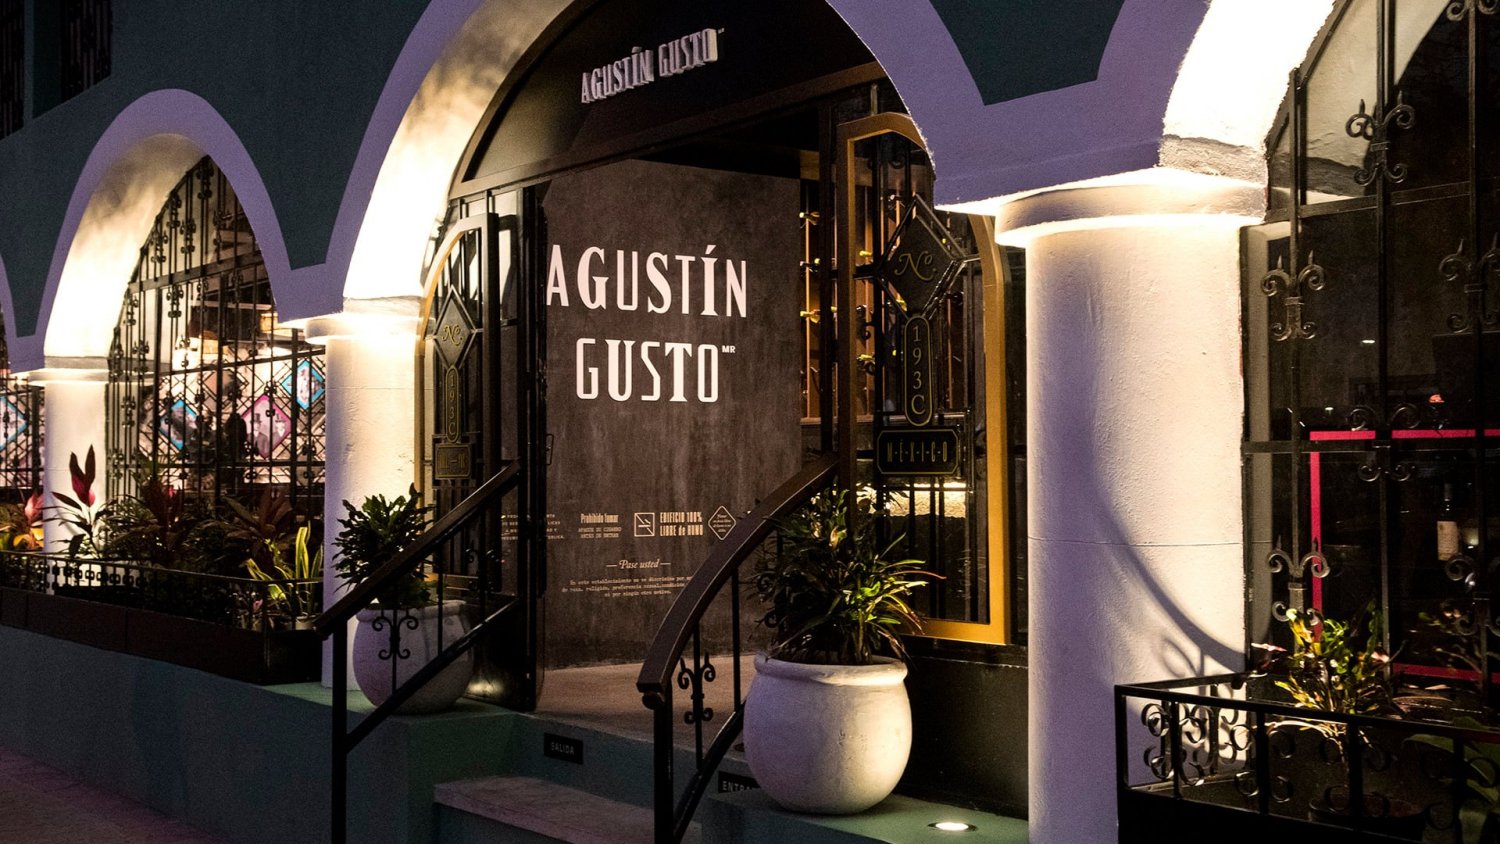 Gastronomic experience at Agustin Gusto